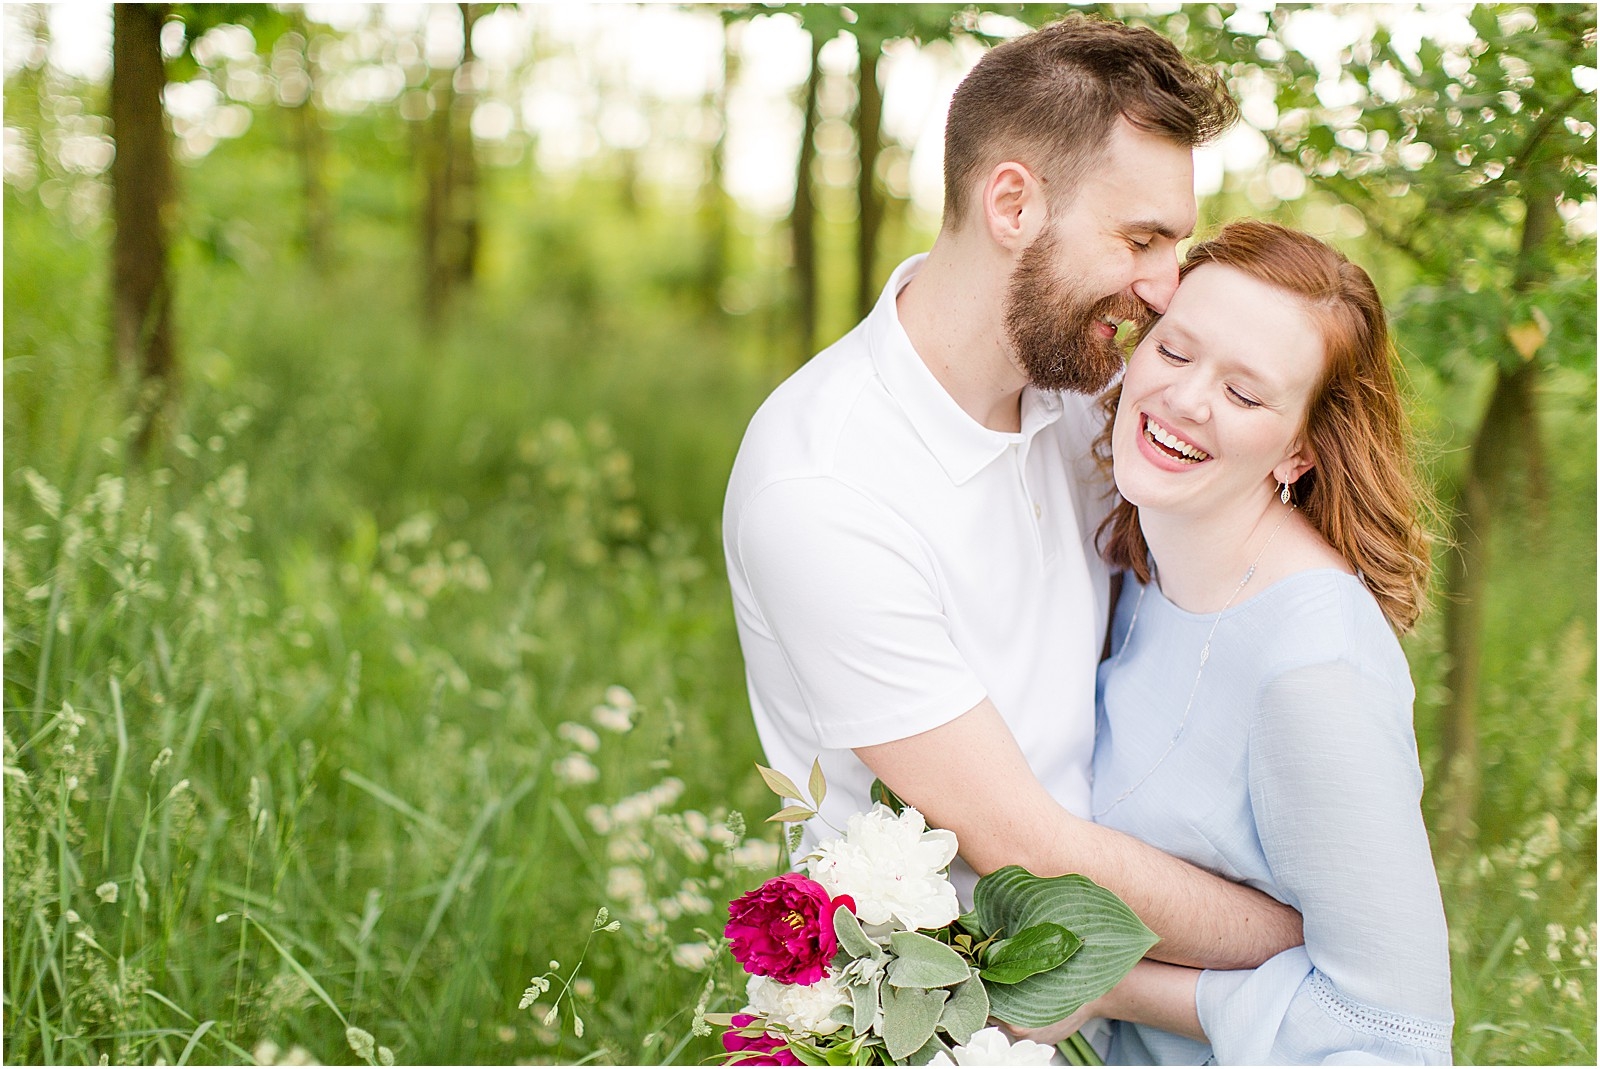 Amy and Logan | The Corner House Bed and Breakfast | Engagement Session016.jpg